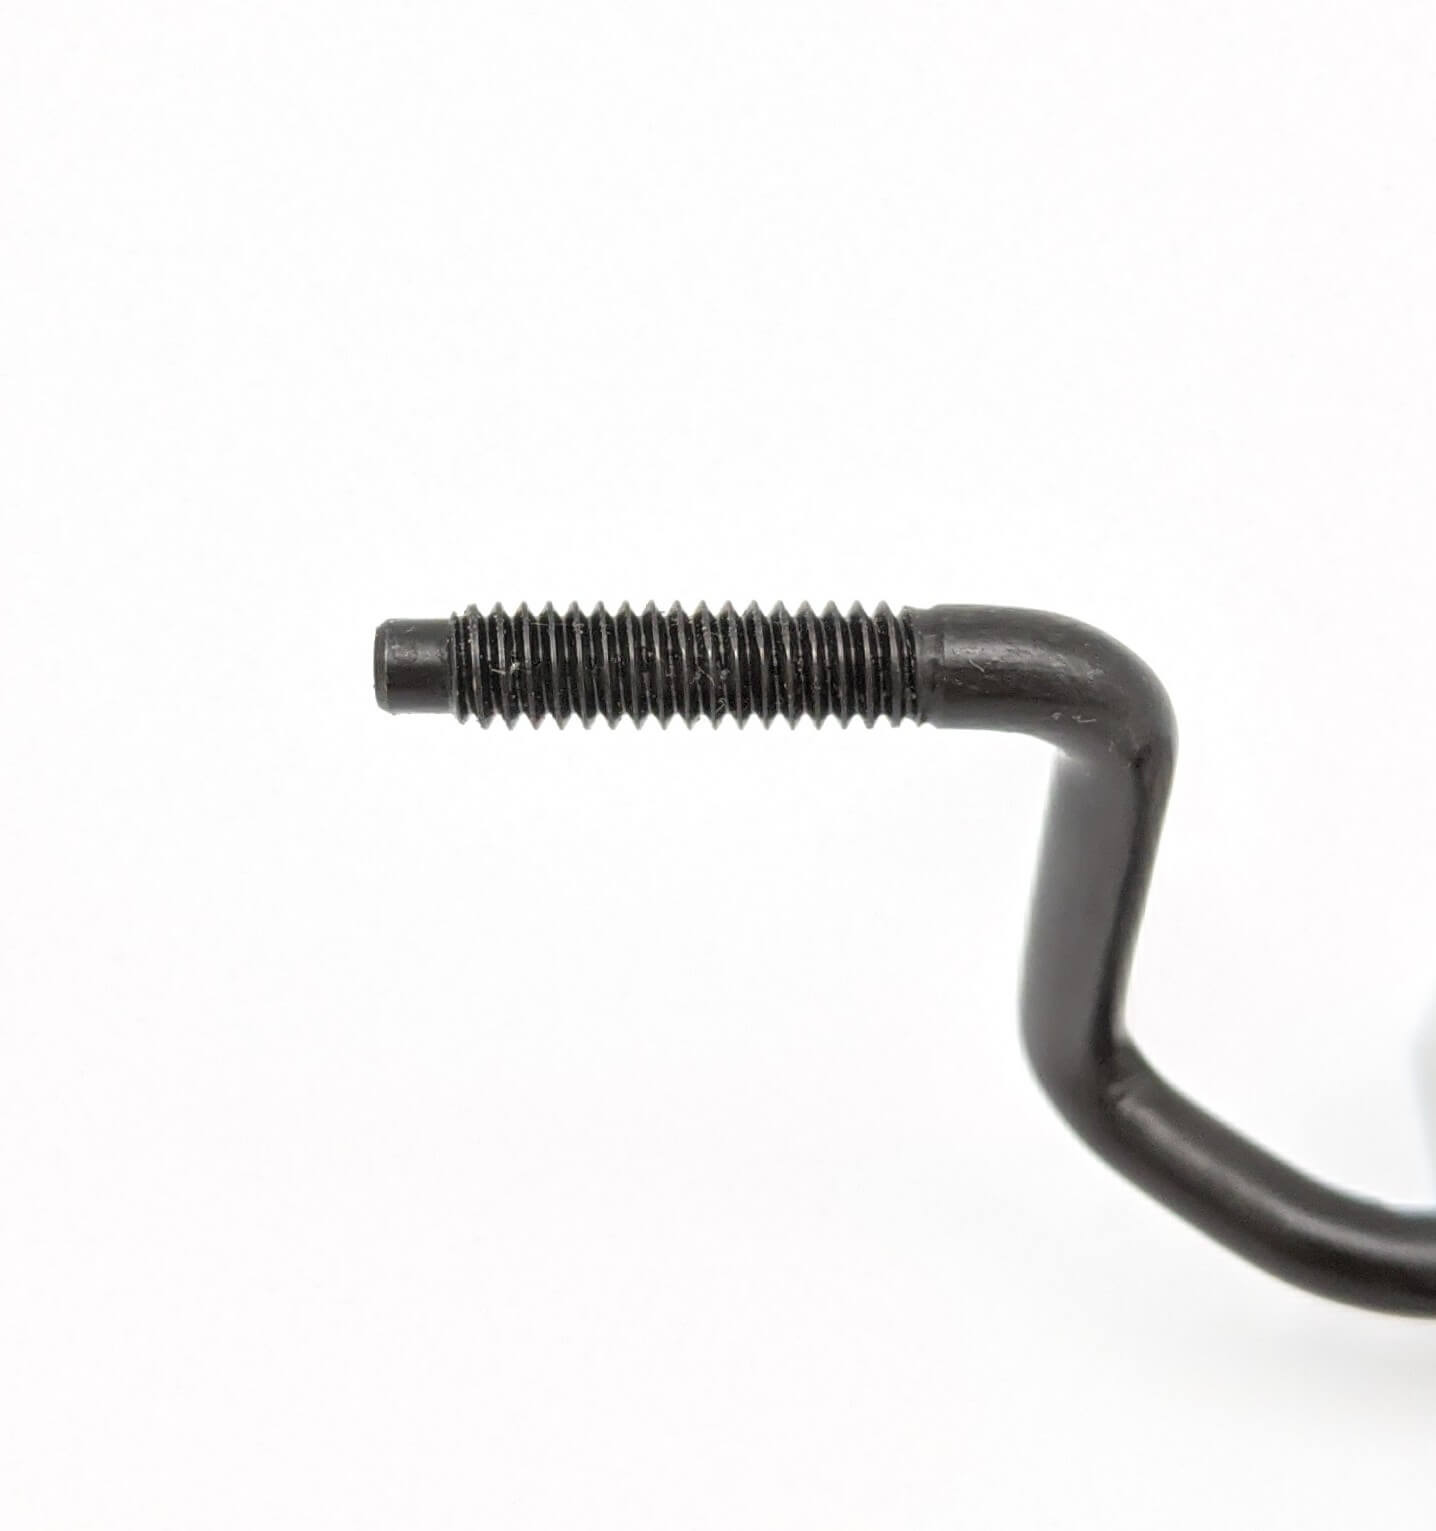 Black wire form with turned down chamfer thread